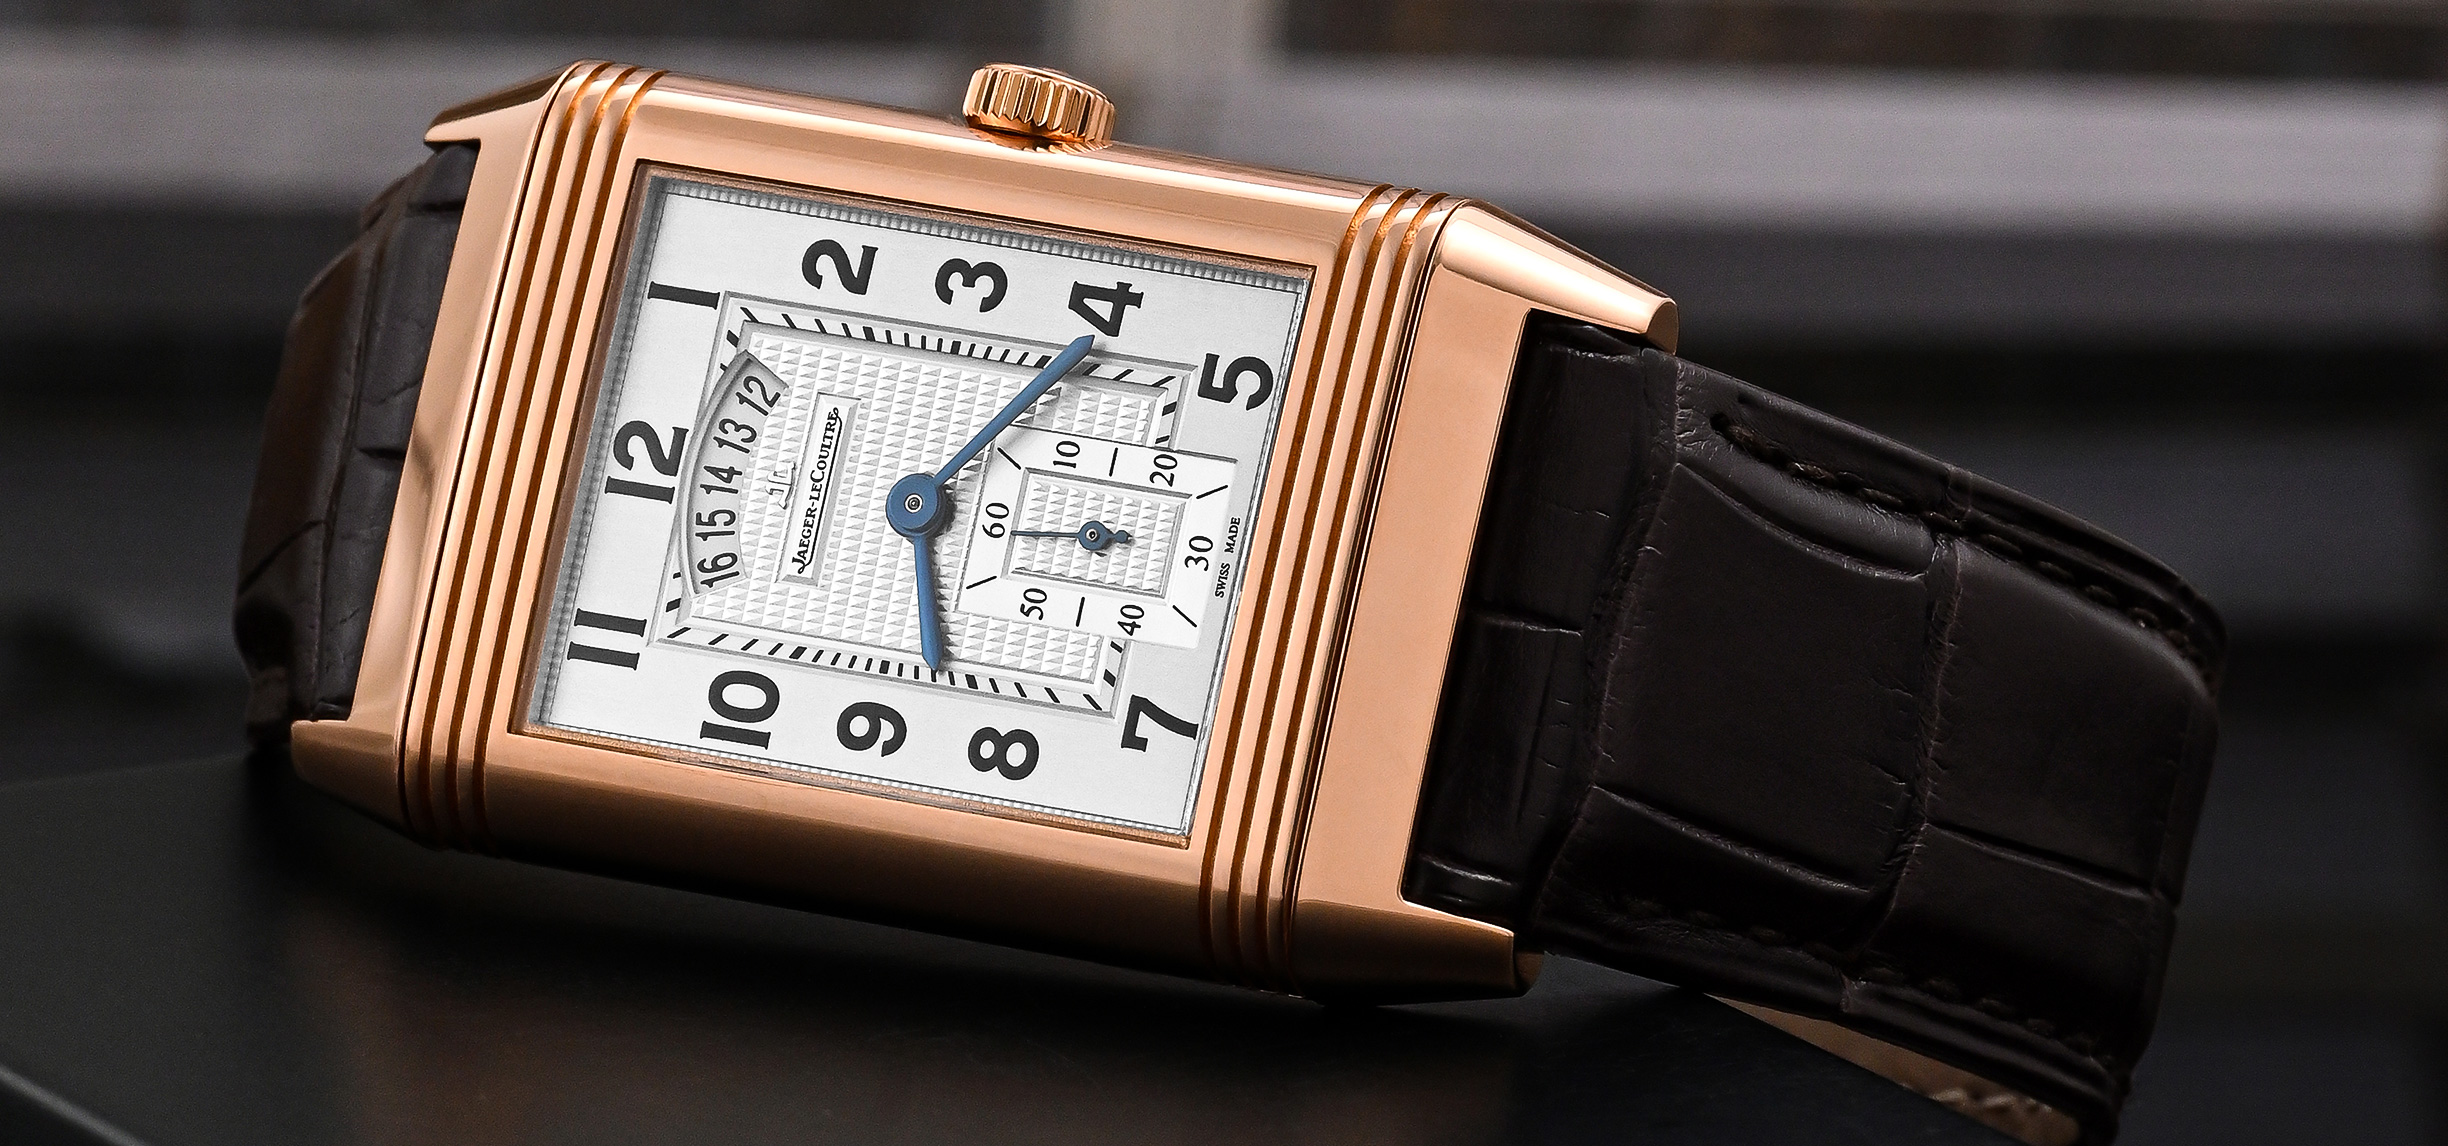 The Jaeger-LeCoultre Guide